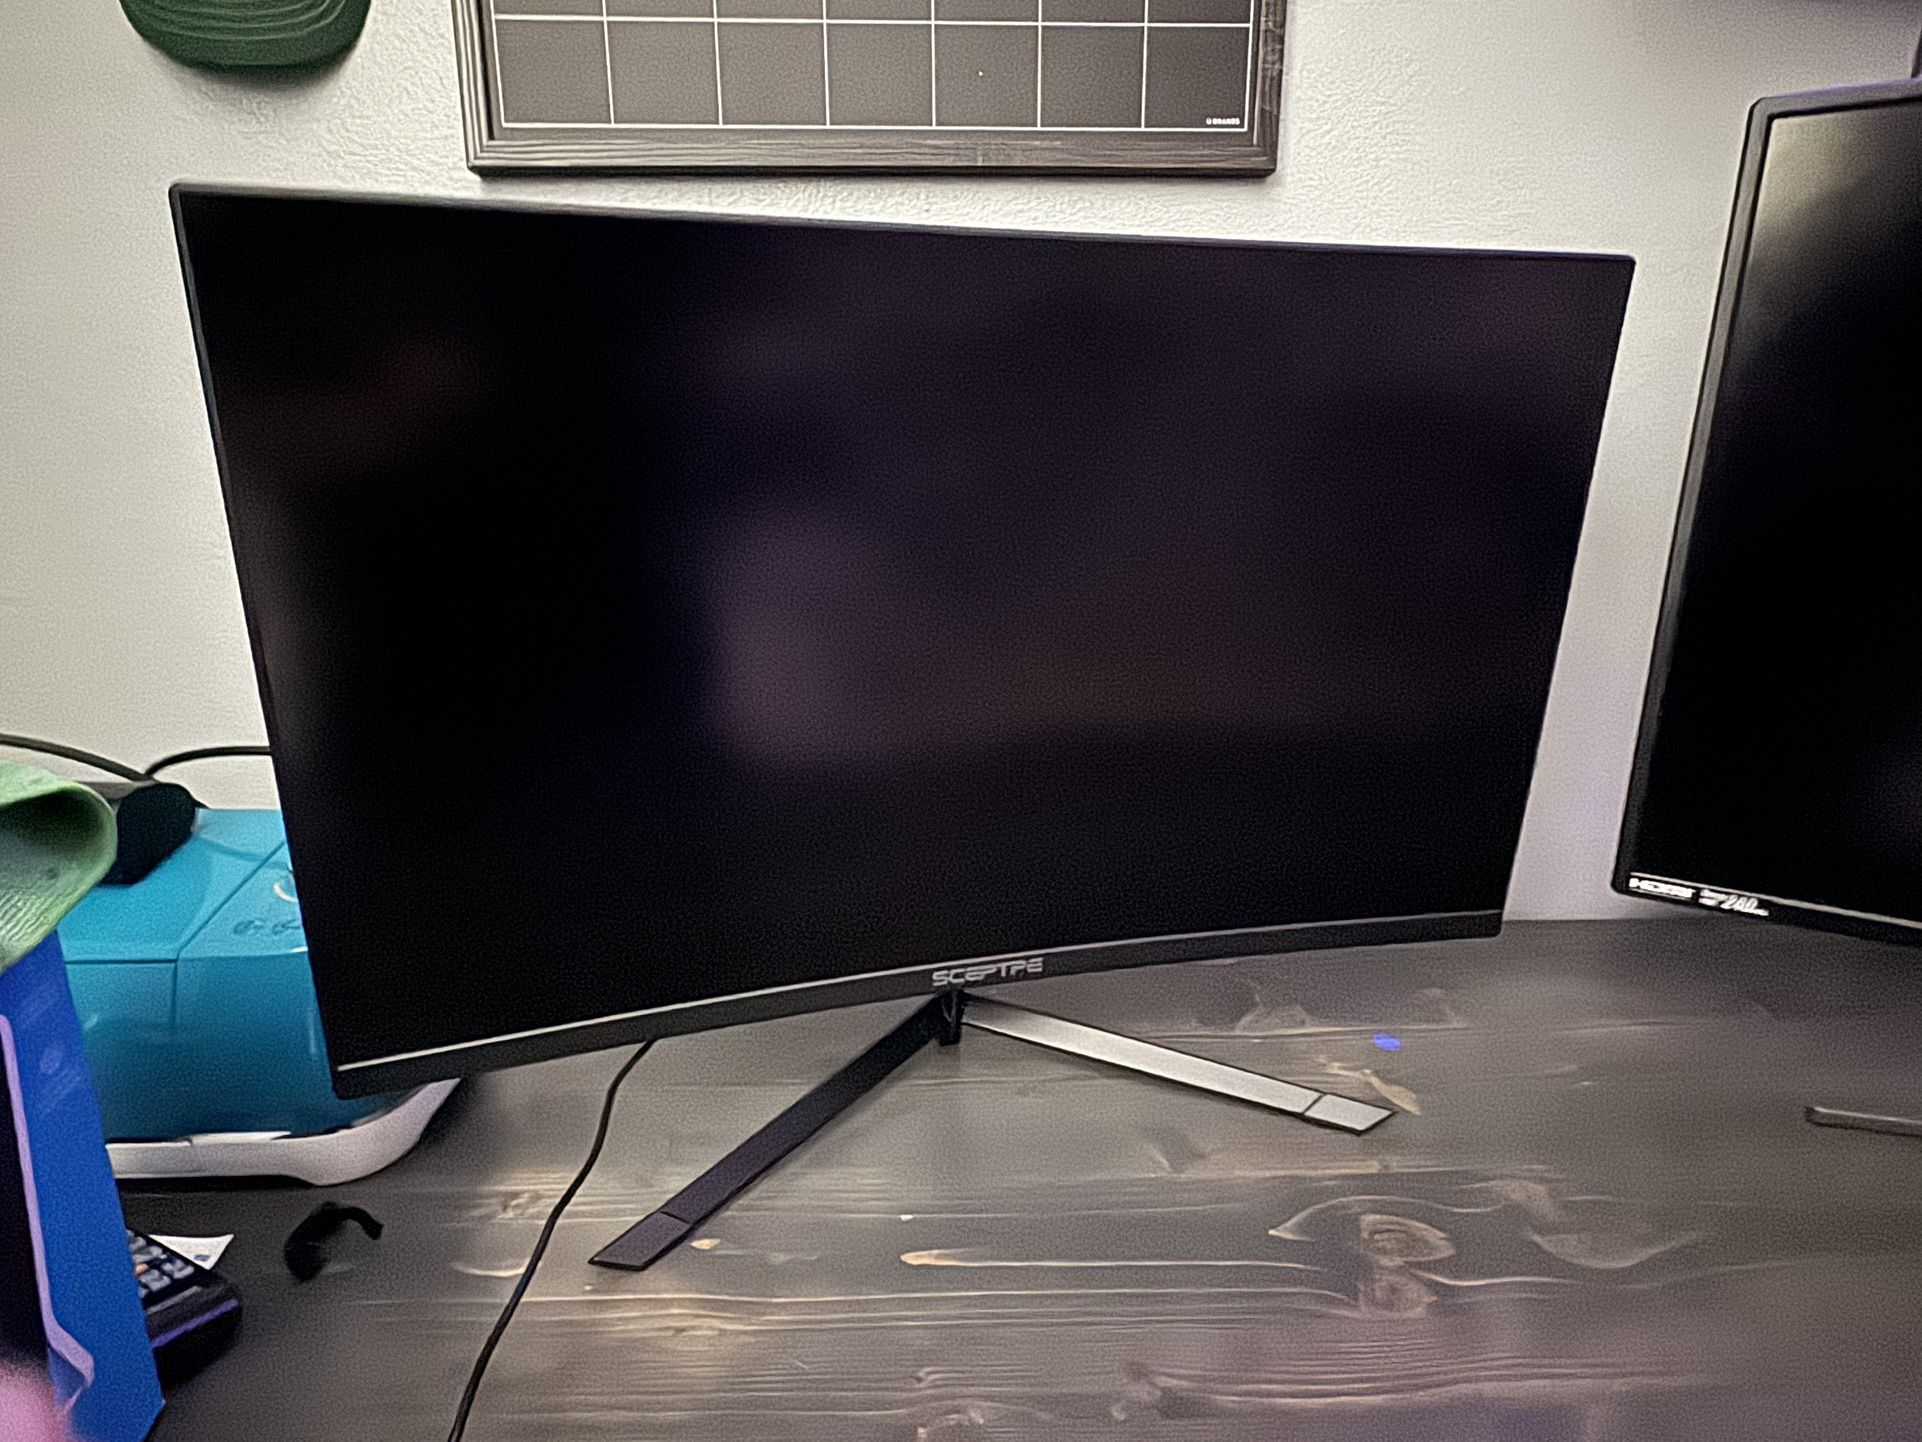 27’ curved gaming monitor